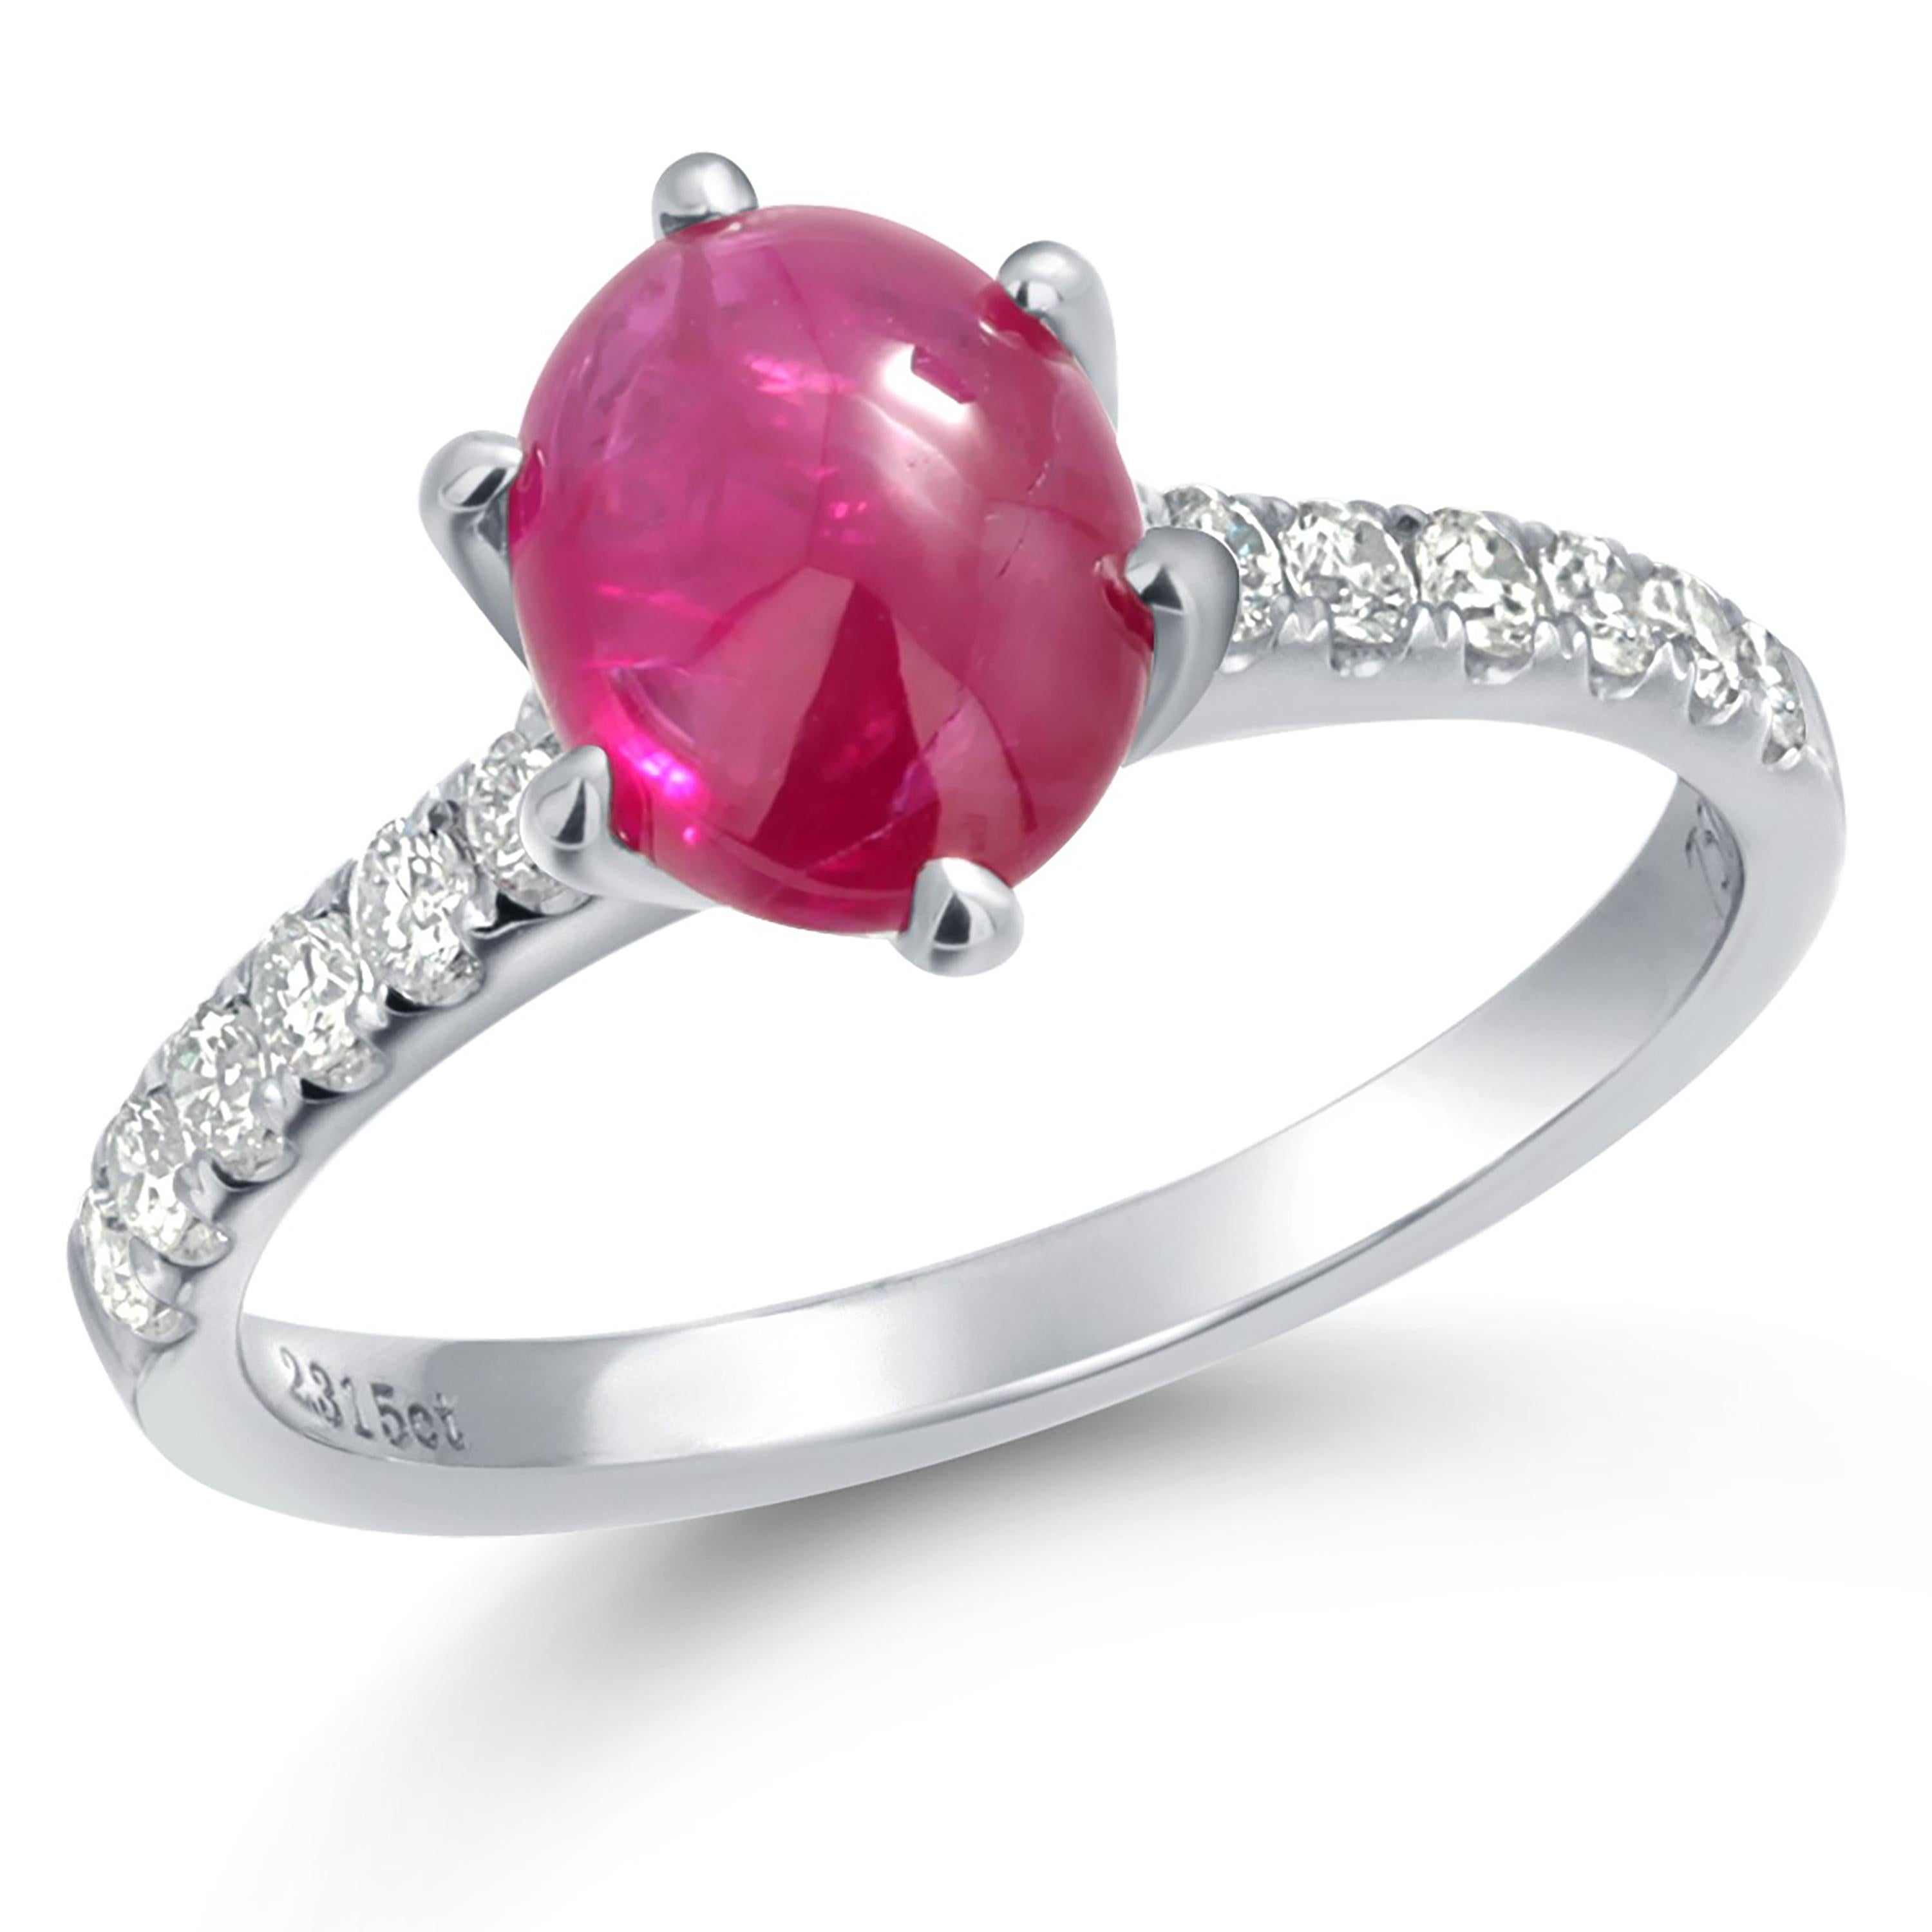 Immerse yourself in the timeless elegance of this vintage engagement ring, expertly crafted in luxurious 18 karat white gold. This exquisite piece features a fine quality Cushion Burma Cabochon Ruby, weighing an impressive 2.10 carats, nestled